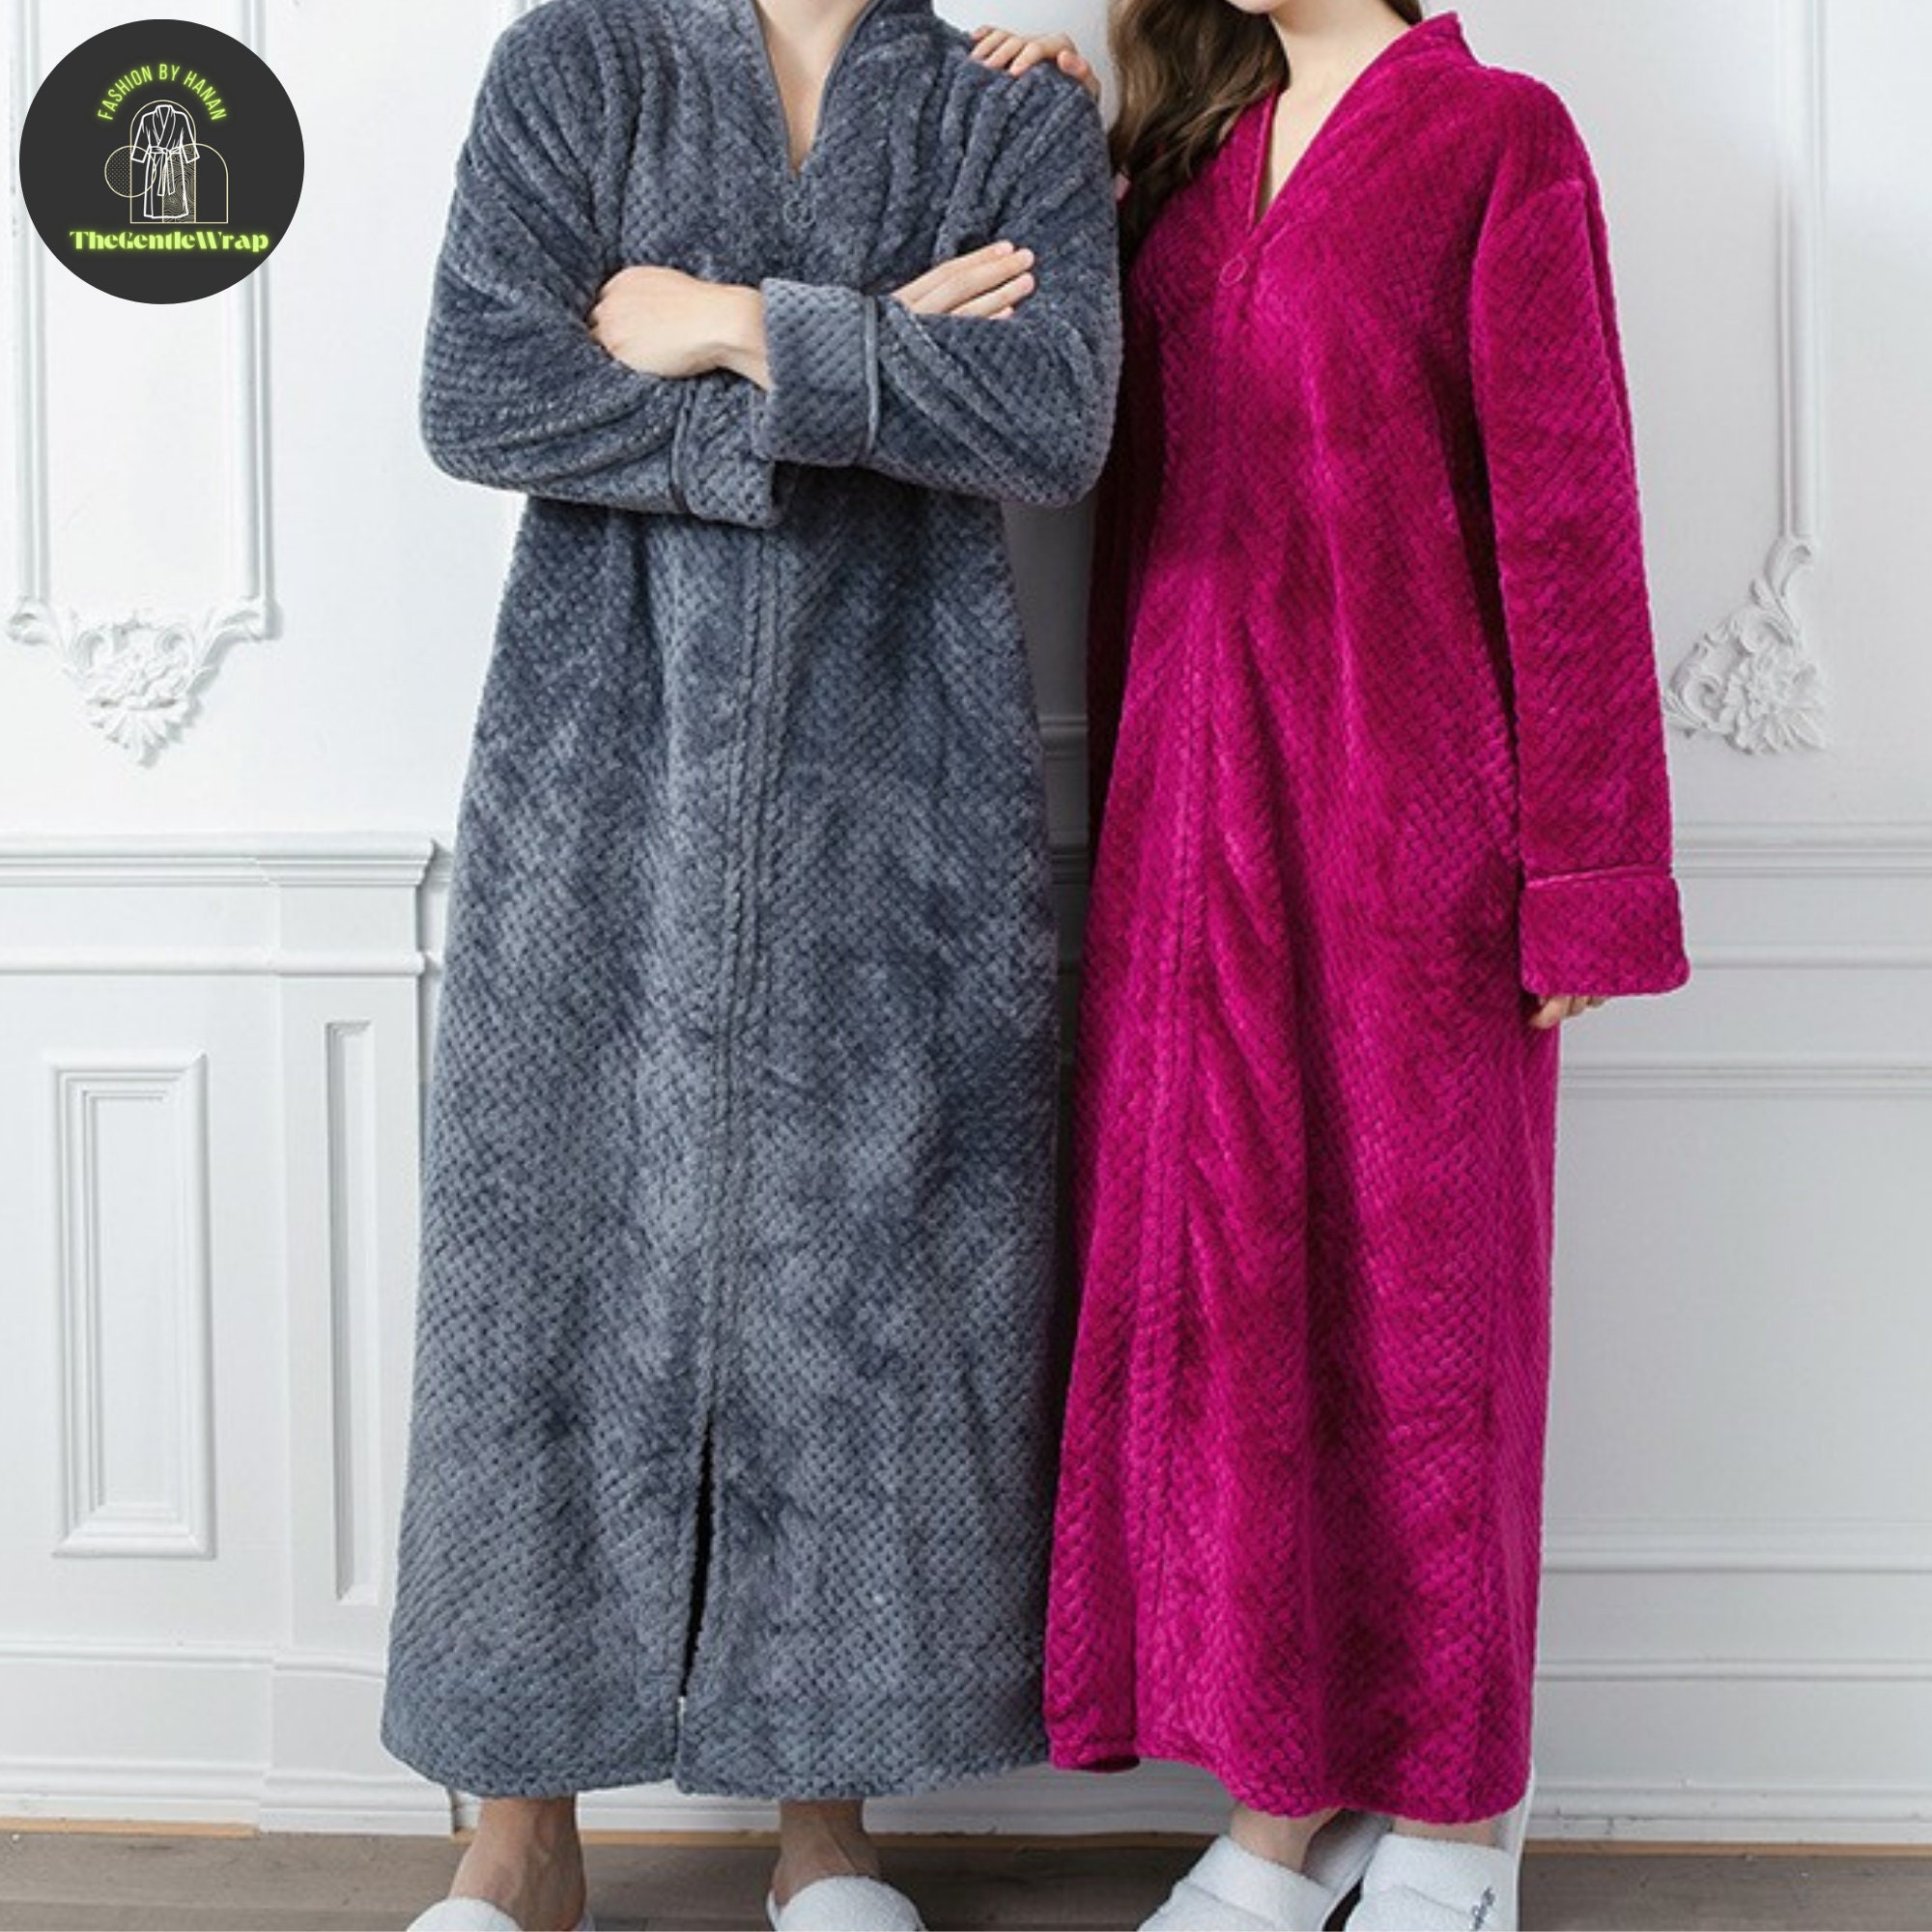 Robes & Dressing Gowns | The Rug Seller